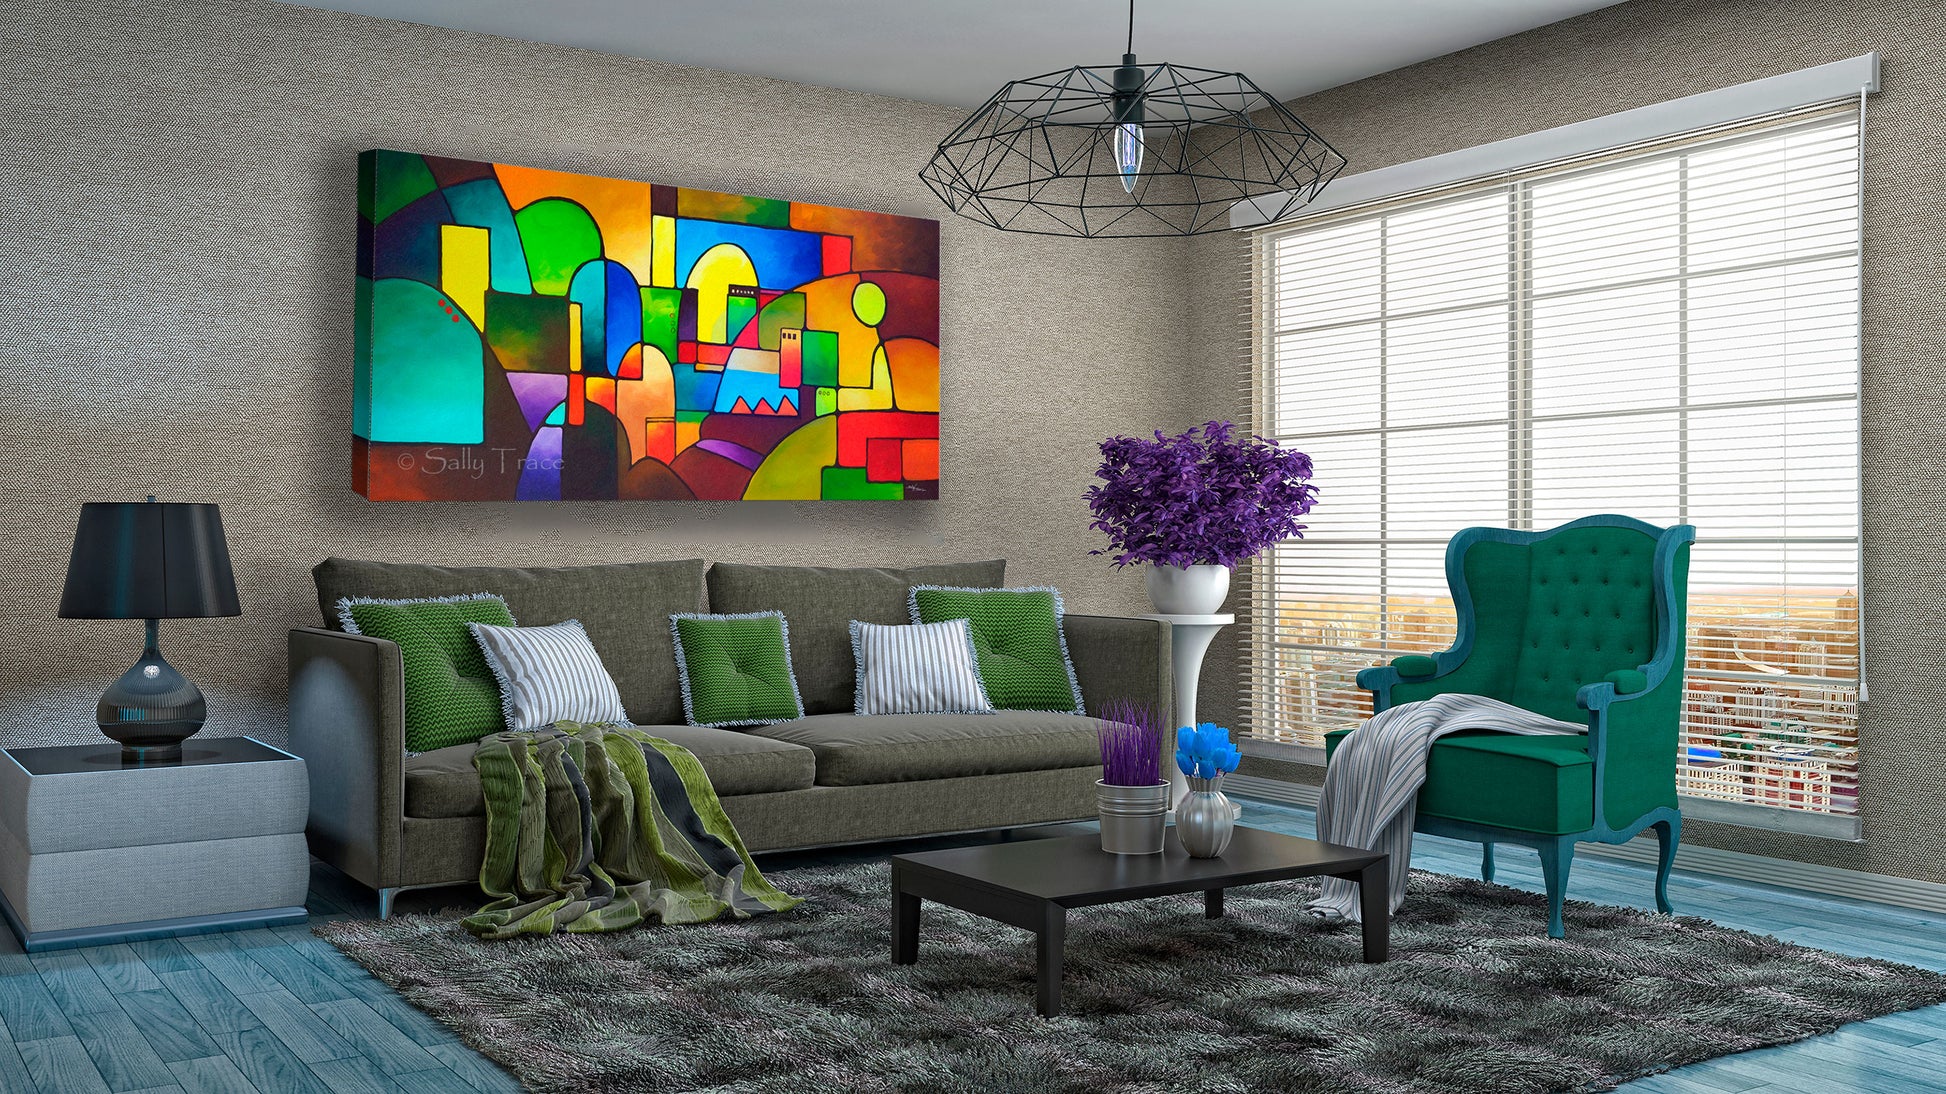 Urbanity 2, giclee print on stretched canvas for sale by Sally Trace, living room view